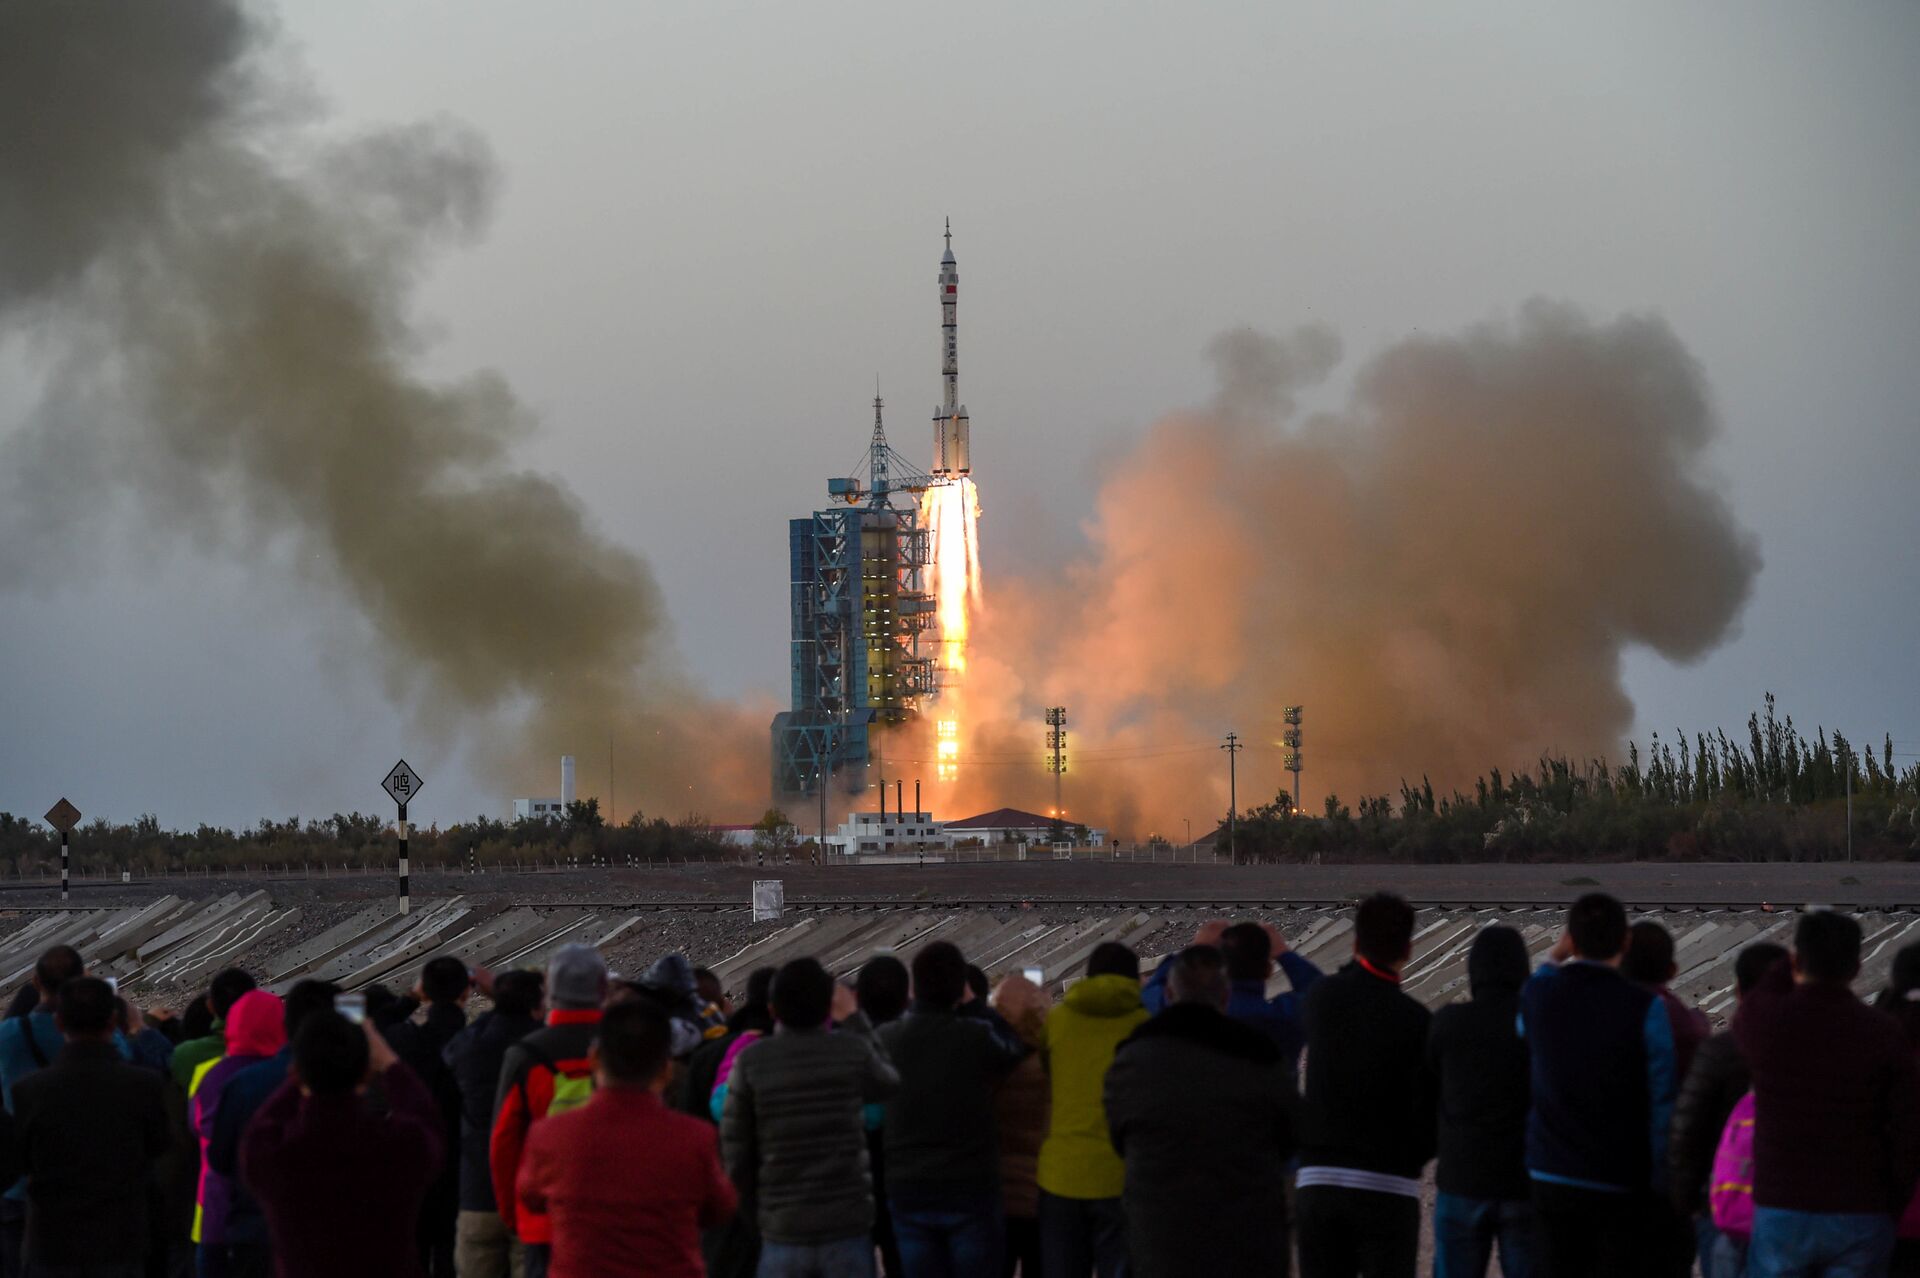 Shenzhou-11 manned spacecraft carrying astronauts Jing Haipeng and Chen Dong blasts off from the launchpad in Jiuquan, China, October 17, 2016 - Sputnik International, 1920, 29.03.2022